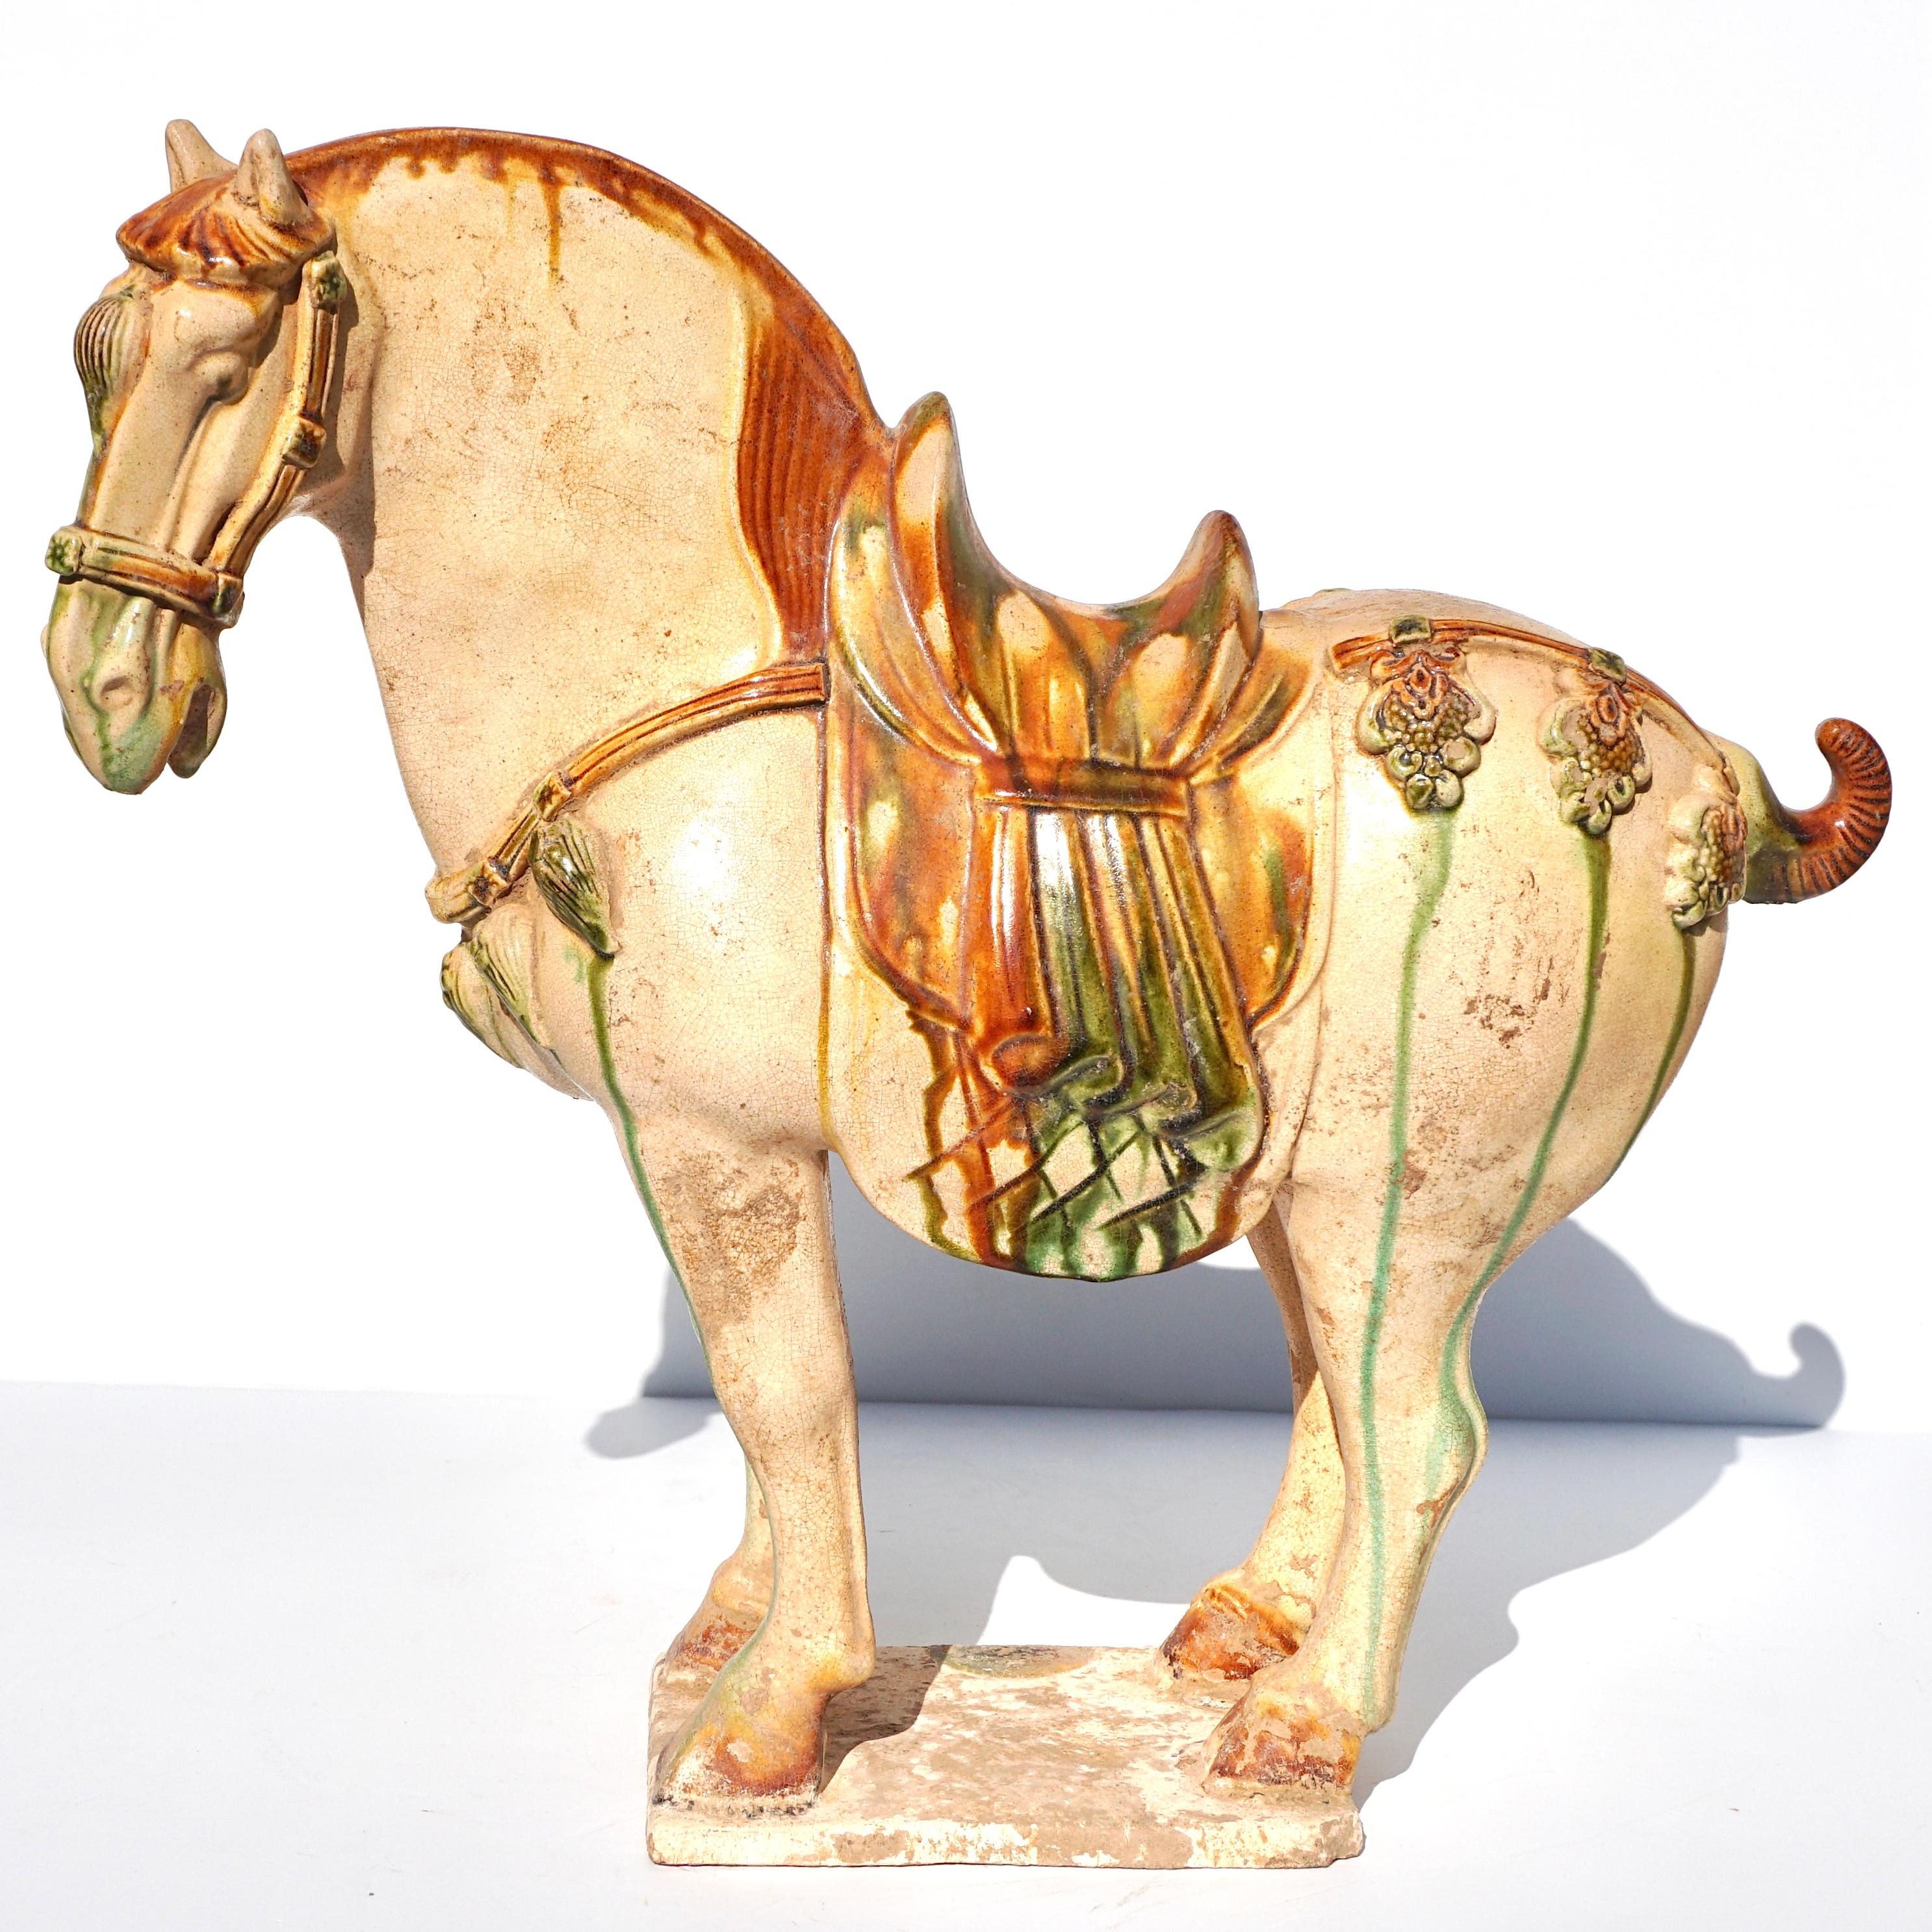 Tang Dynasty (618 - 907) Sancai glazed pottery horse TL Tested

The cream-glazed horse is naturalistically modelled standing on a rectangular base, with the mane, tail and hooves highlighted in amber glaze. The head is gracefully curved to the left,